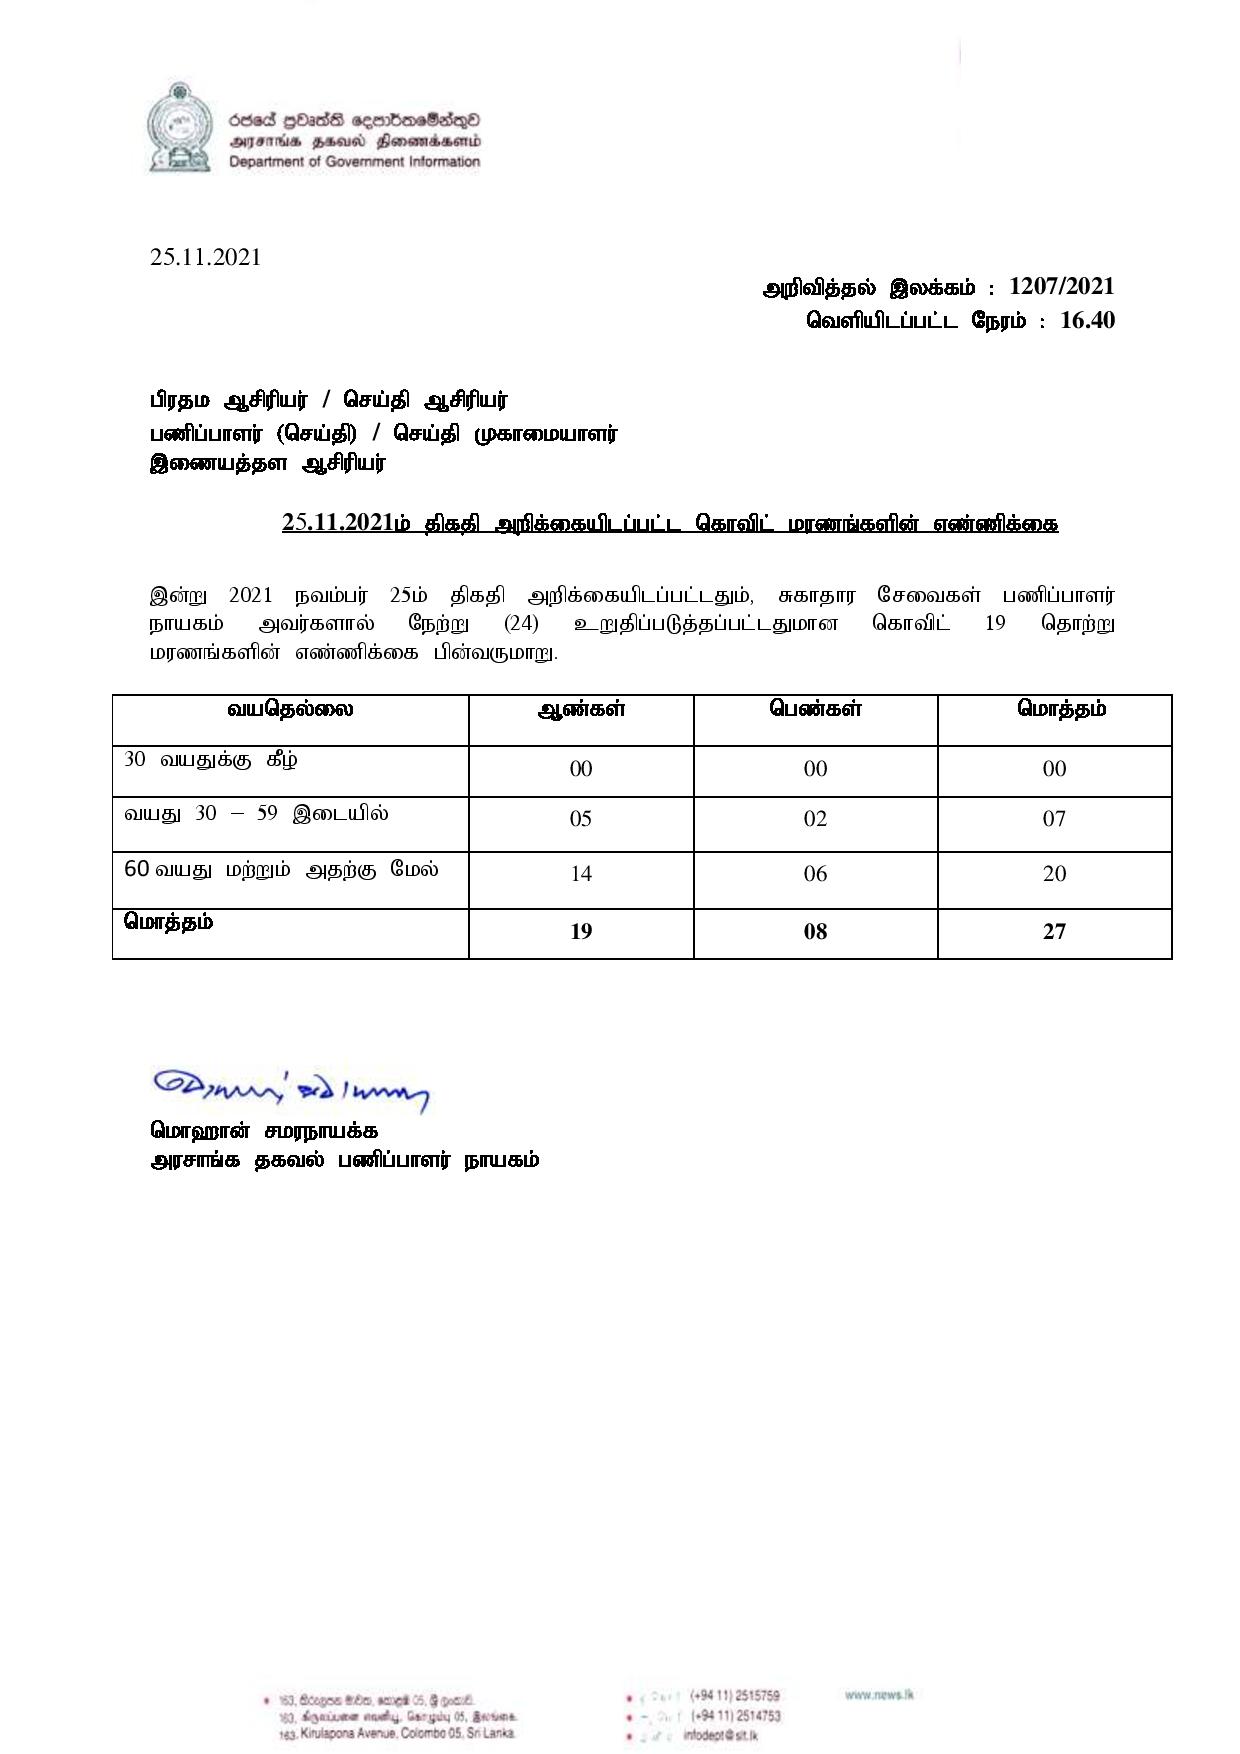 Release No 1207 Tamil page 001